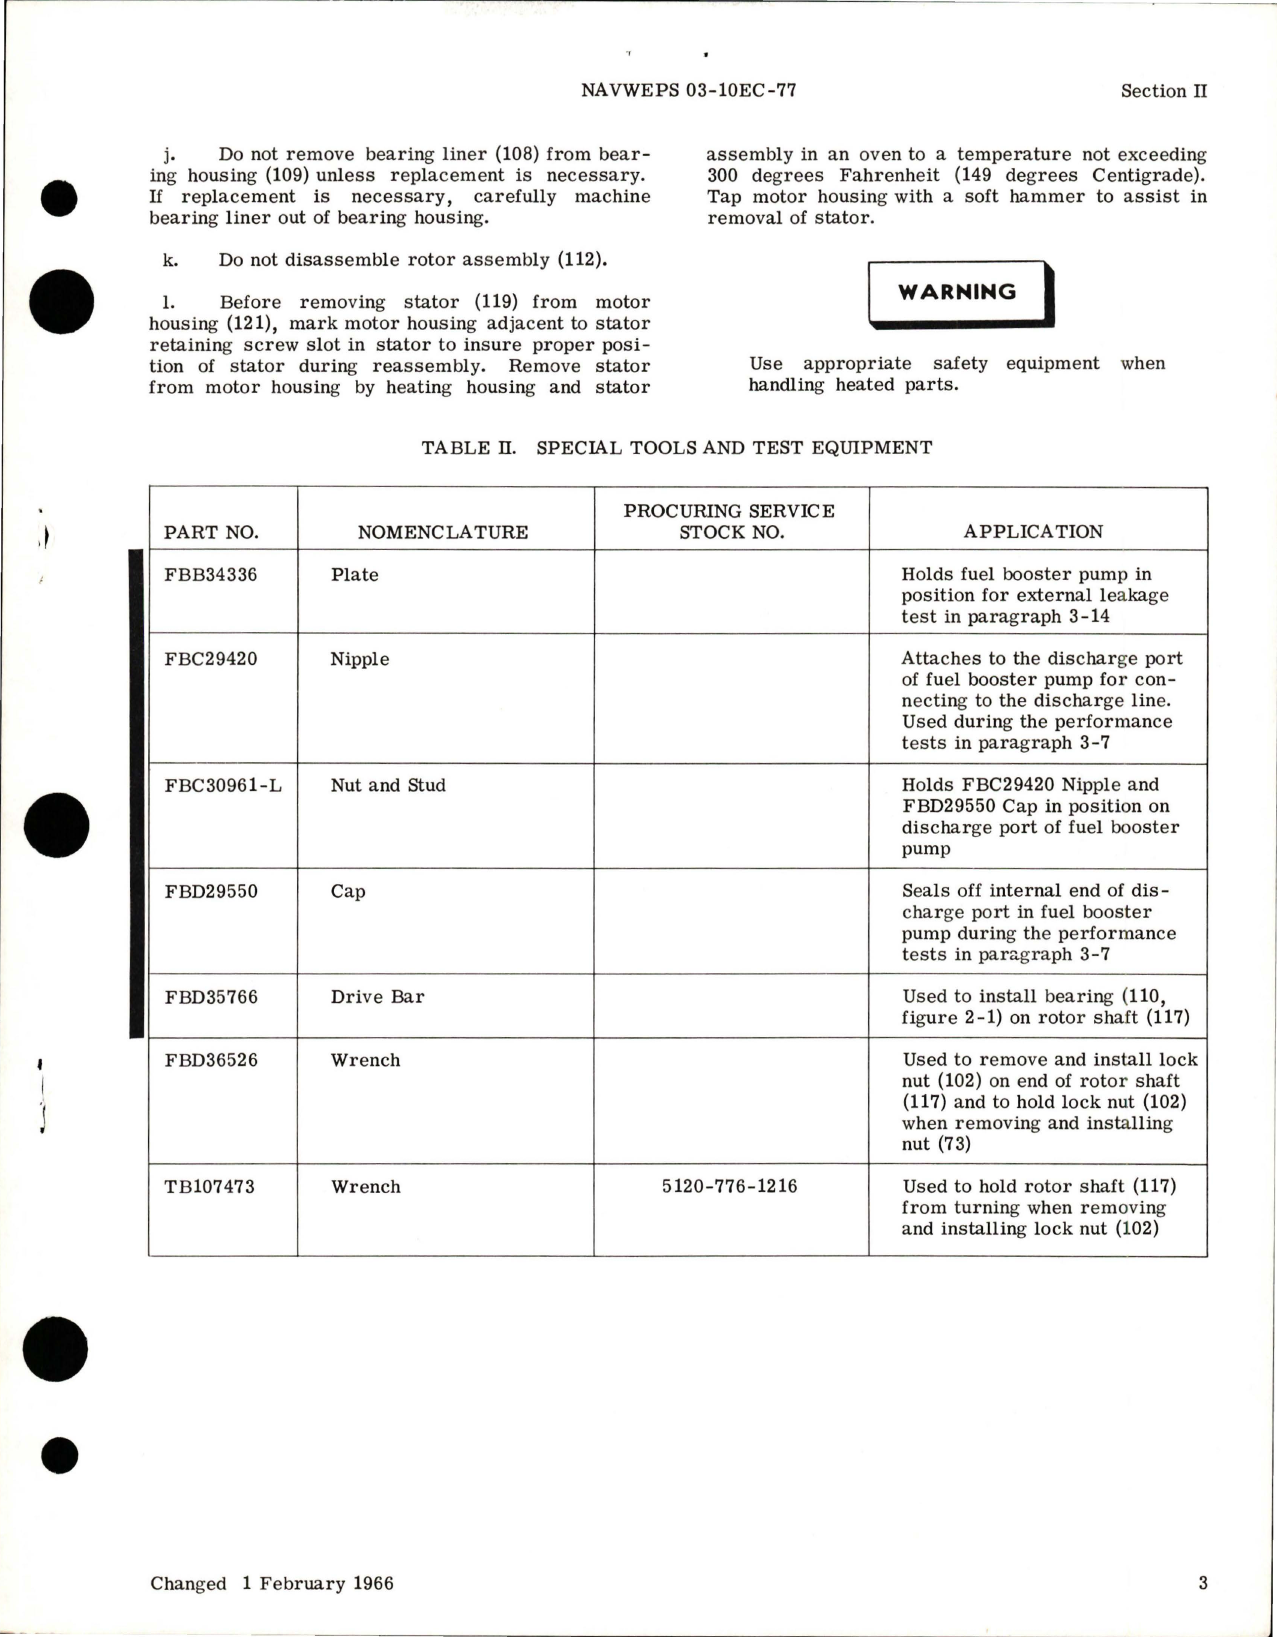 Sample page 5 from AirCorps Library document: Overhaul Instructions for Fuel Booster Pump - Models TB131300-3, 238900-1